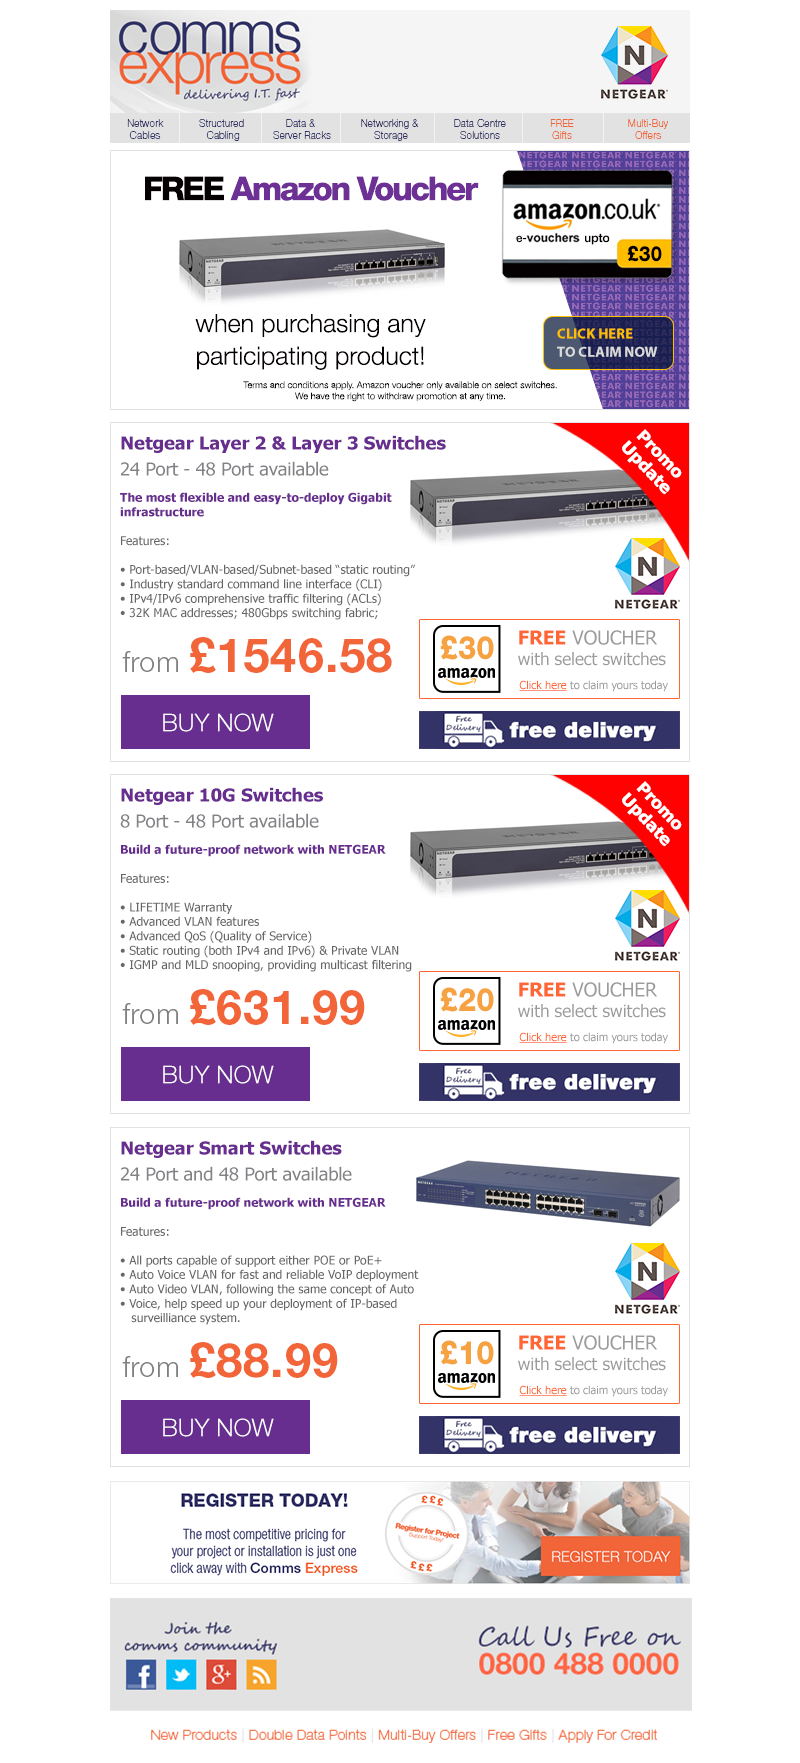 FREE Amazon voucher with select Netgear switches